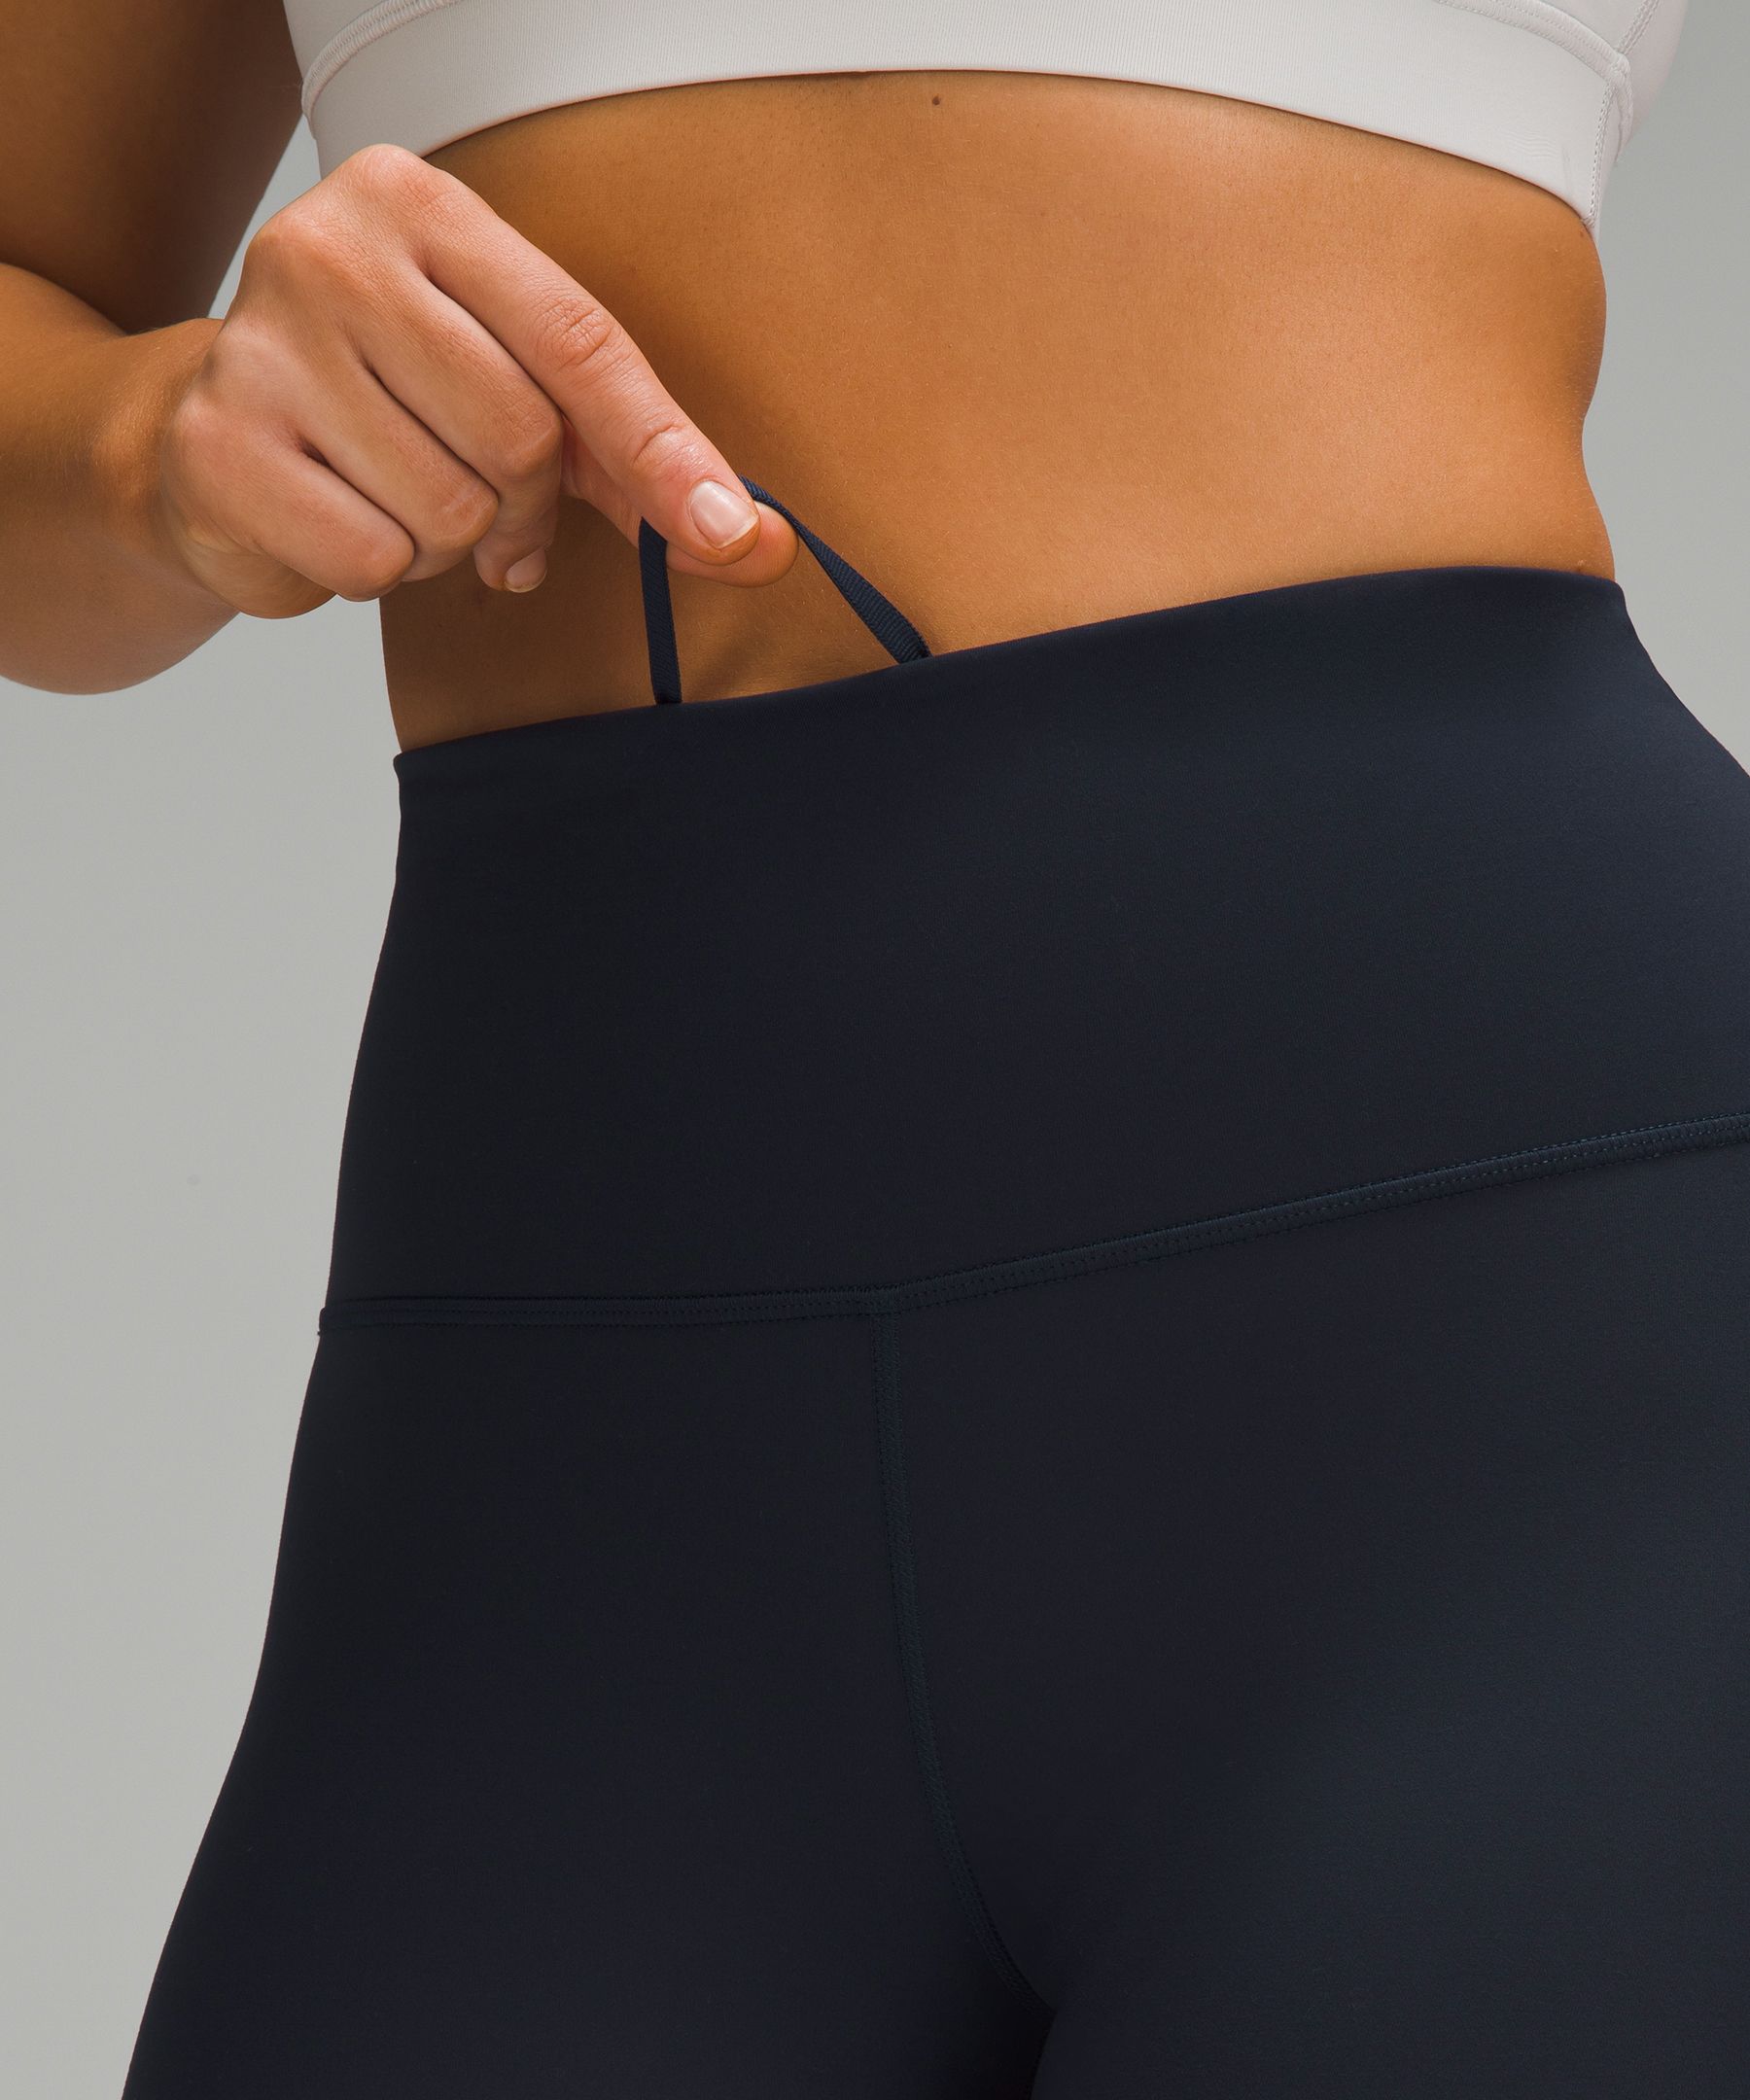 NWOT - !!!SOLD OUT!!! Lululemon Tight Stuff Tight II *25 Black, SIZE: 4, 6,  10